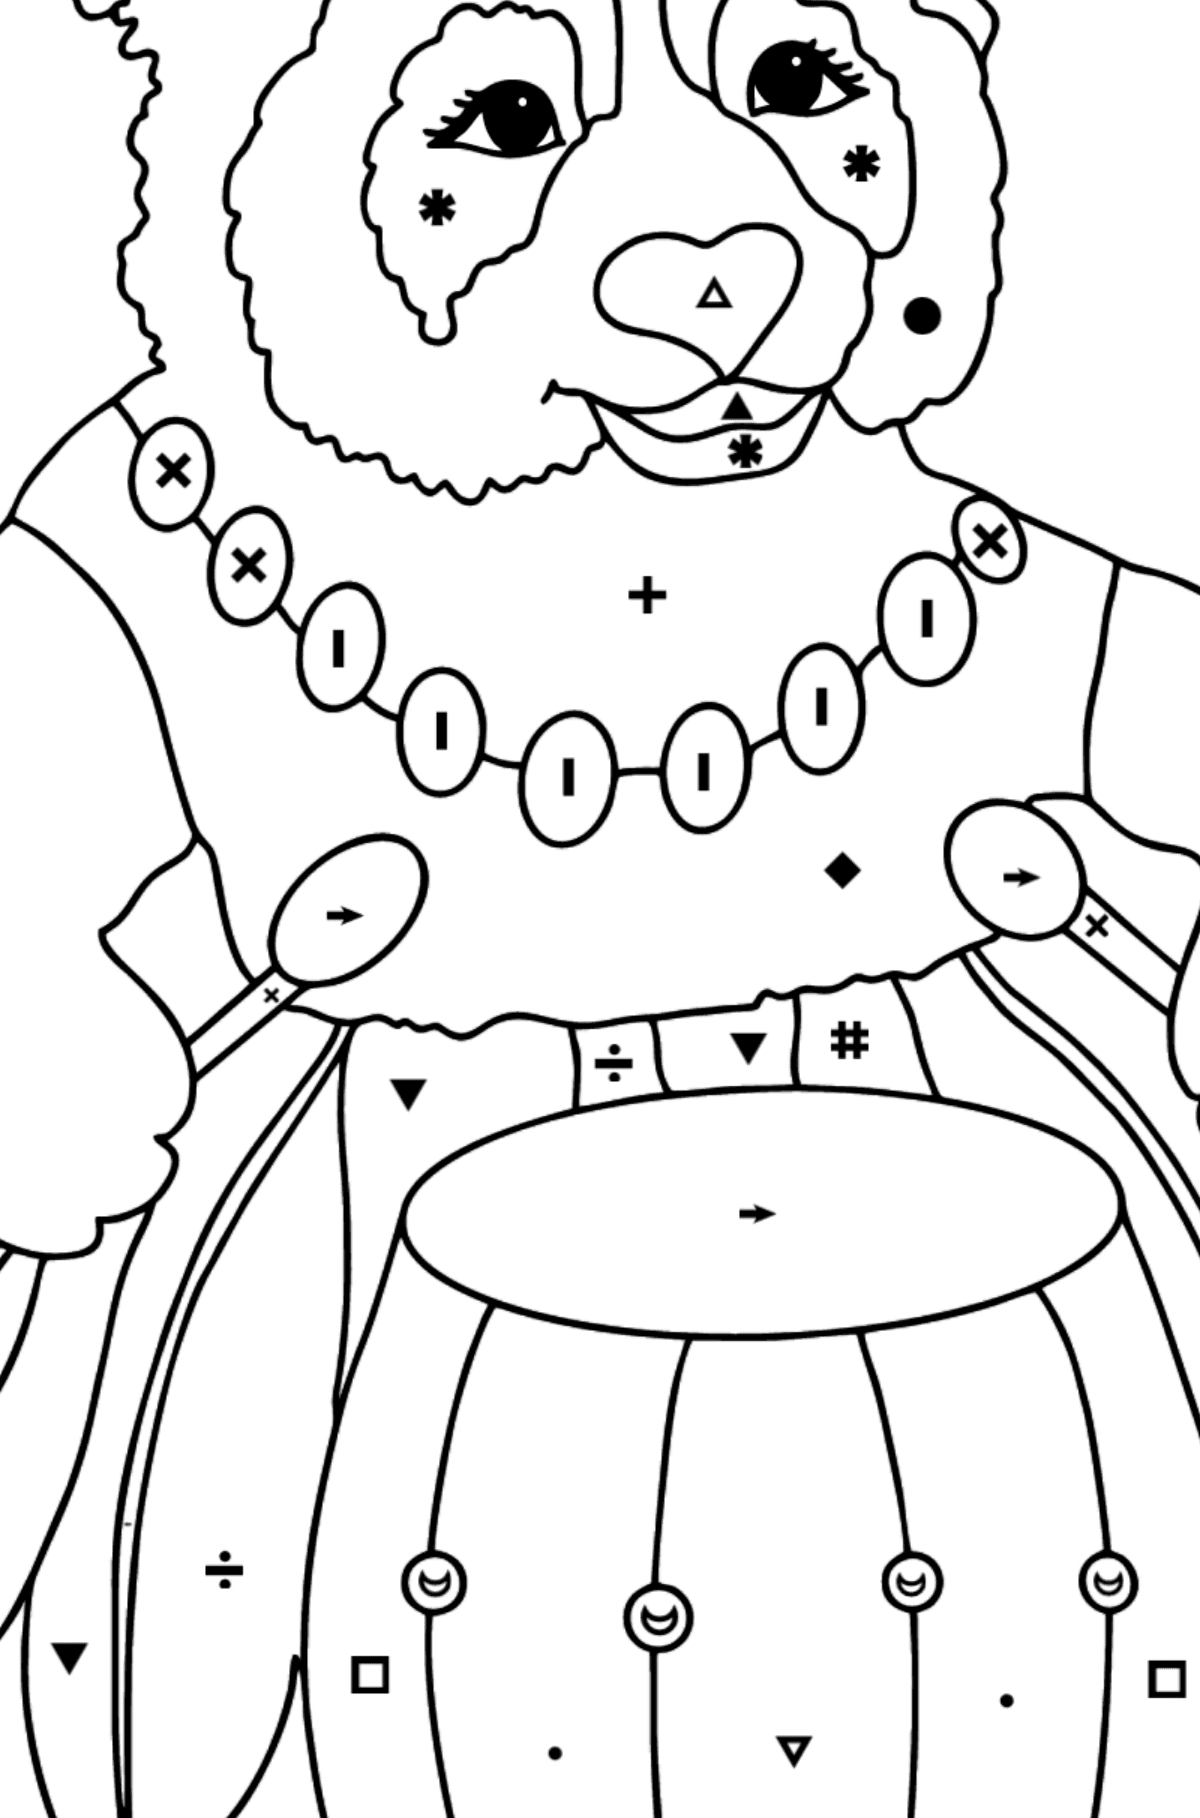 Panda For Kids (Hard) coloring page - Coloring by Symbols for Kids